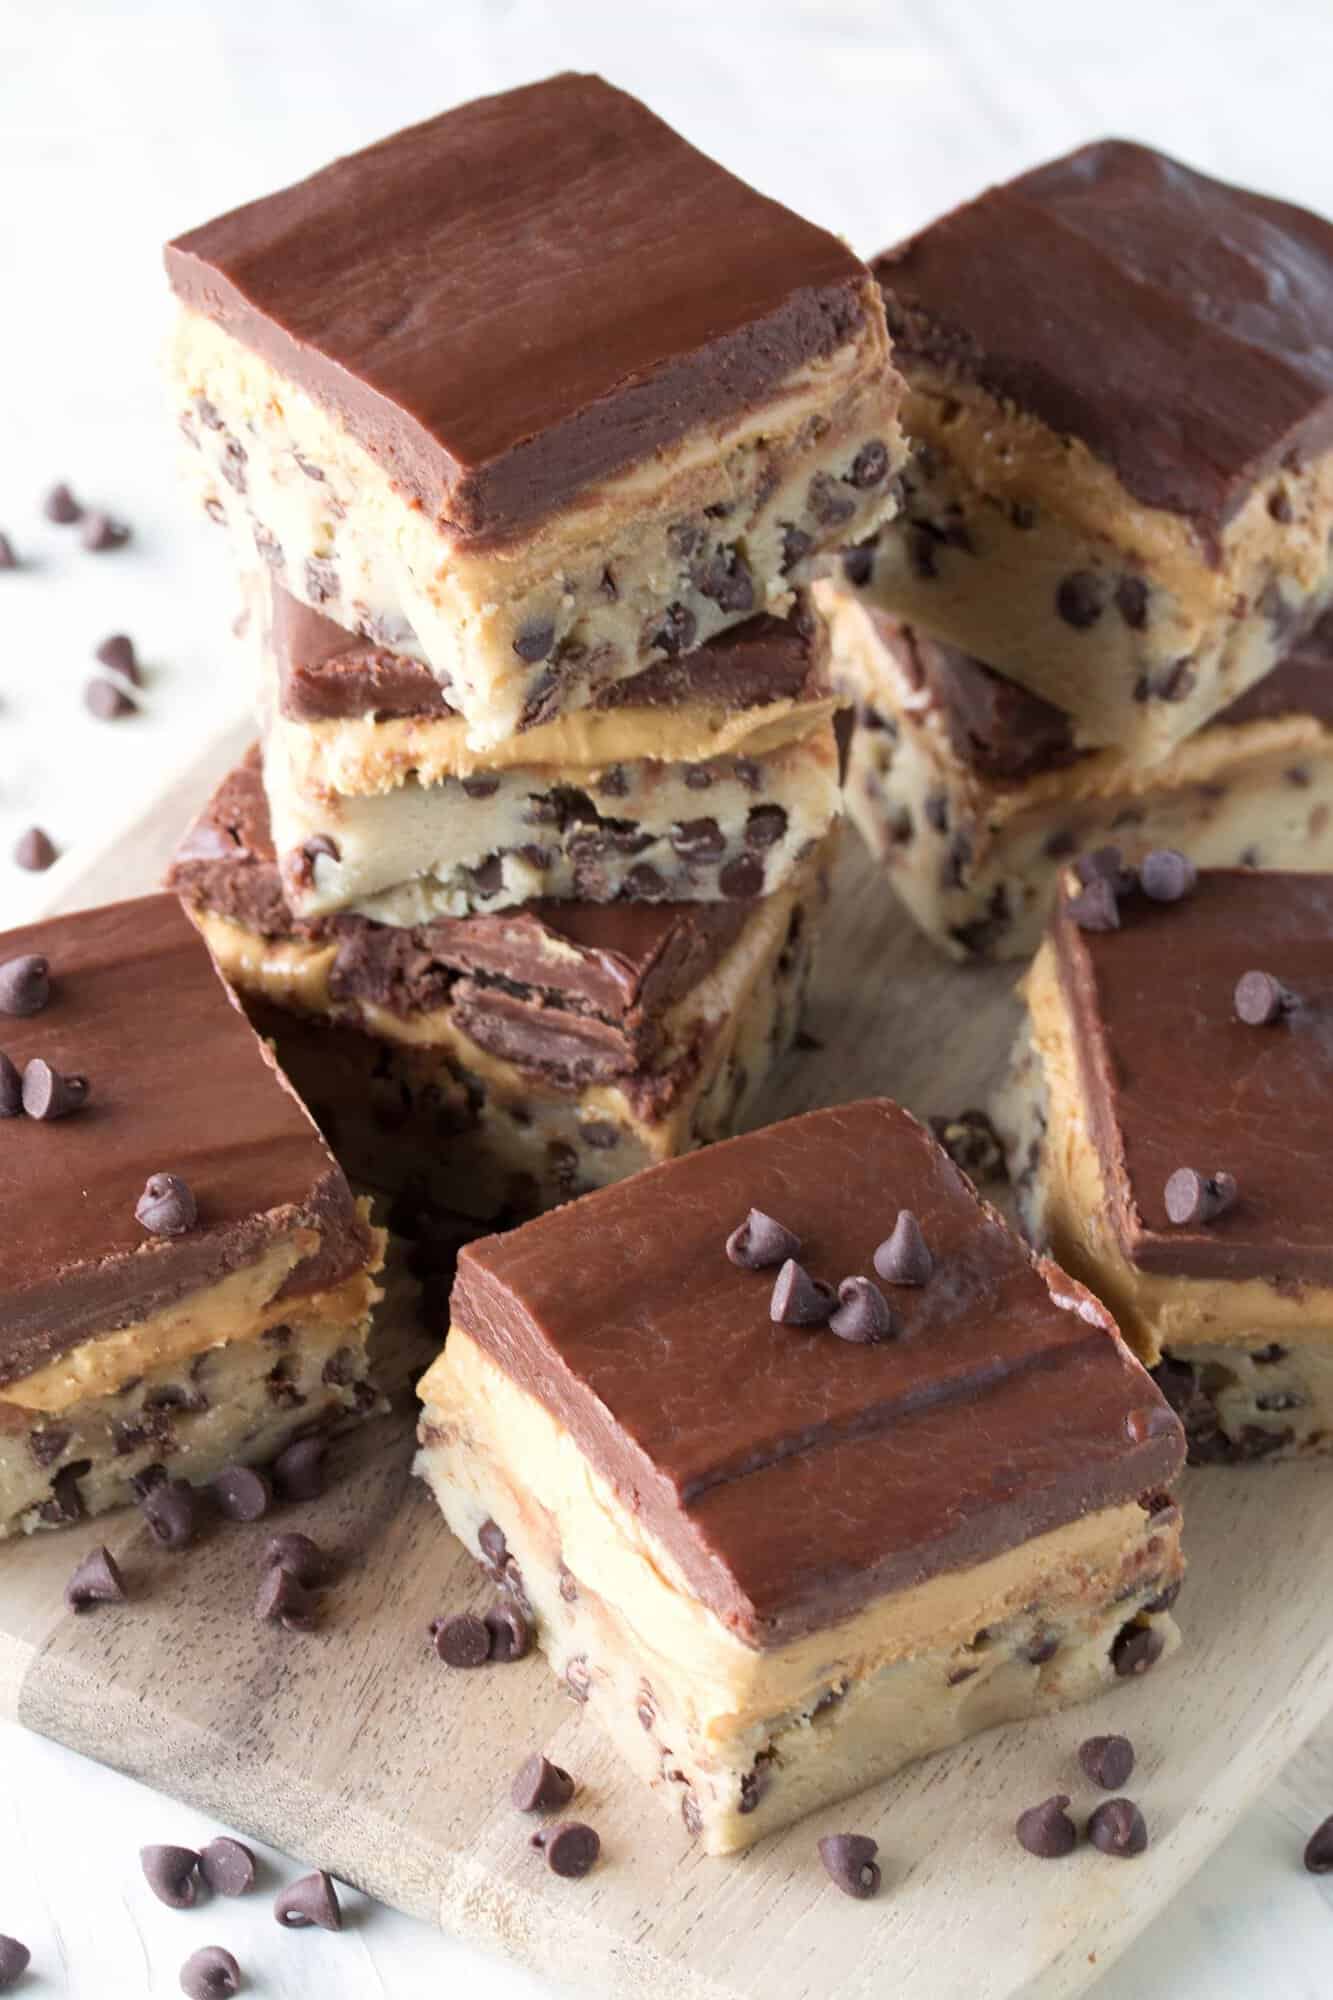 Chocolate chip cookie dough, peanut butter cup filling, and a chocolate ganache create three layers of no bake goodness. No Bake Peanut Butter Chocolate Chip Cookie Dough Bars are simply irresistible!